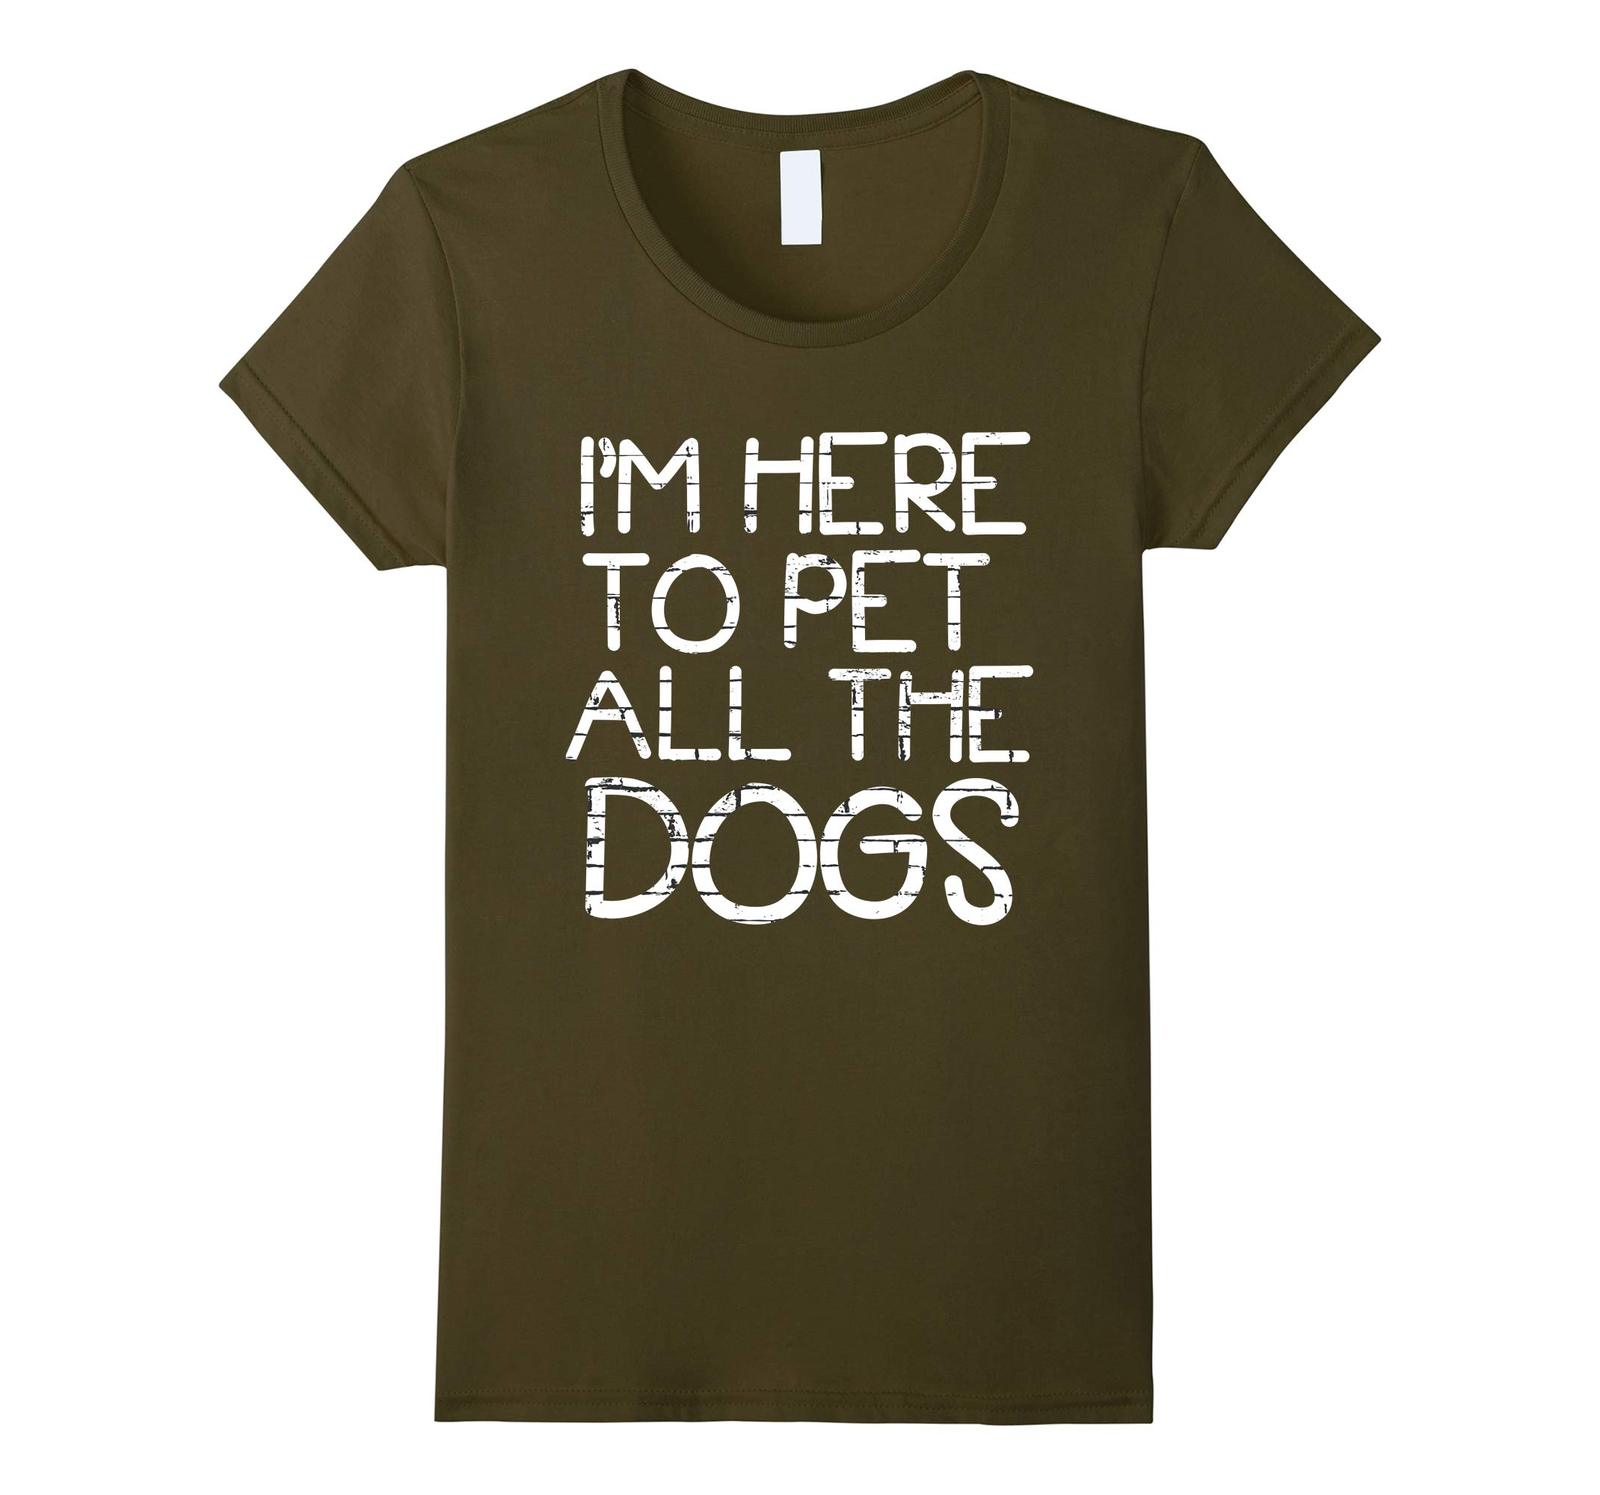 Dog Fashion - I'm Here To Pet All The Dogs T-Shirt Funny T Shirt Wowen